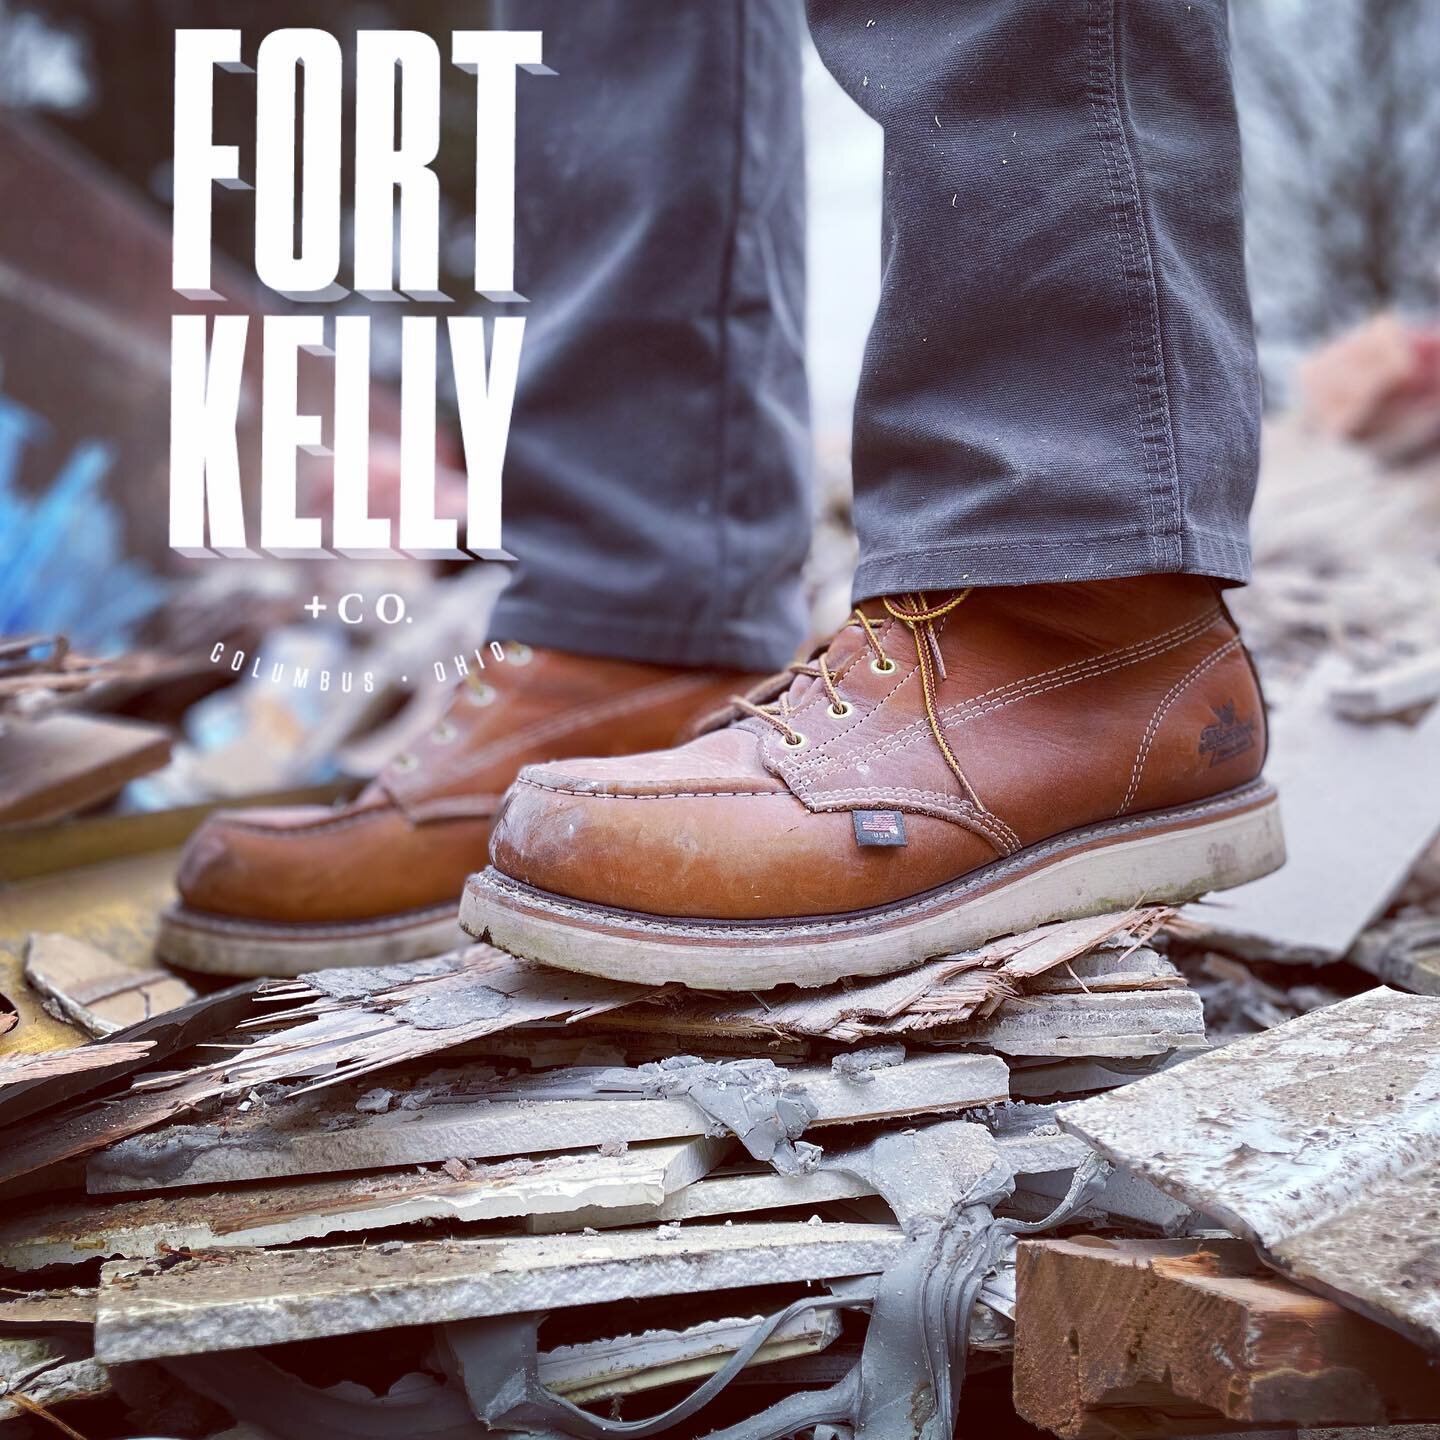 Founder of Fort Kelly flexing some new steel toe kicks from @thorogood_usa! We&rsquo;ll check back in periodically and see how these are breaking in. Stay tuned.
.
.
.

#fortkellyandco #fortkelly #craftsman #614columbus #614 #columbusremodel #homeren